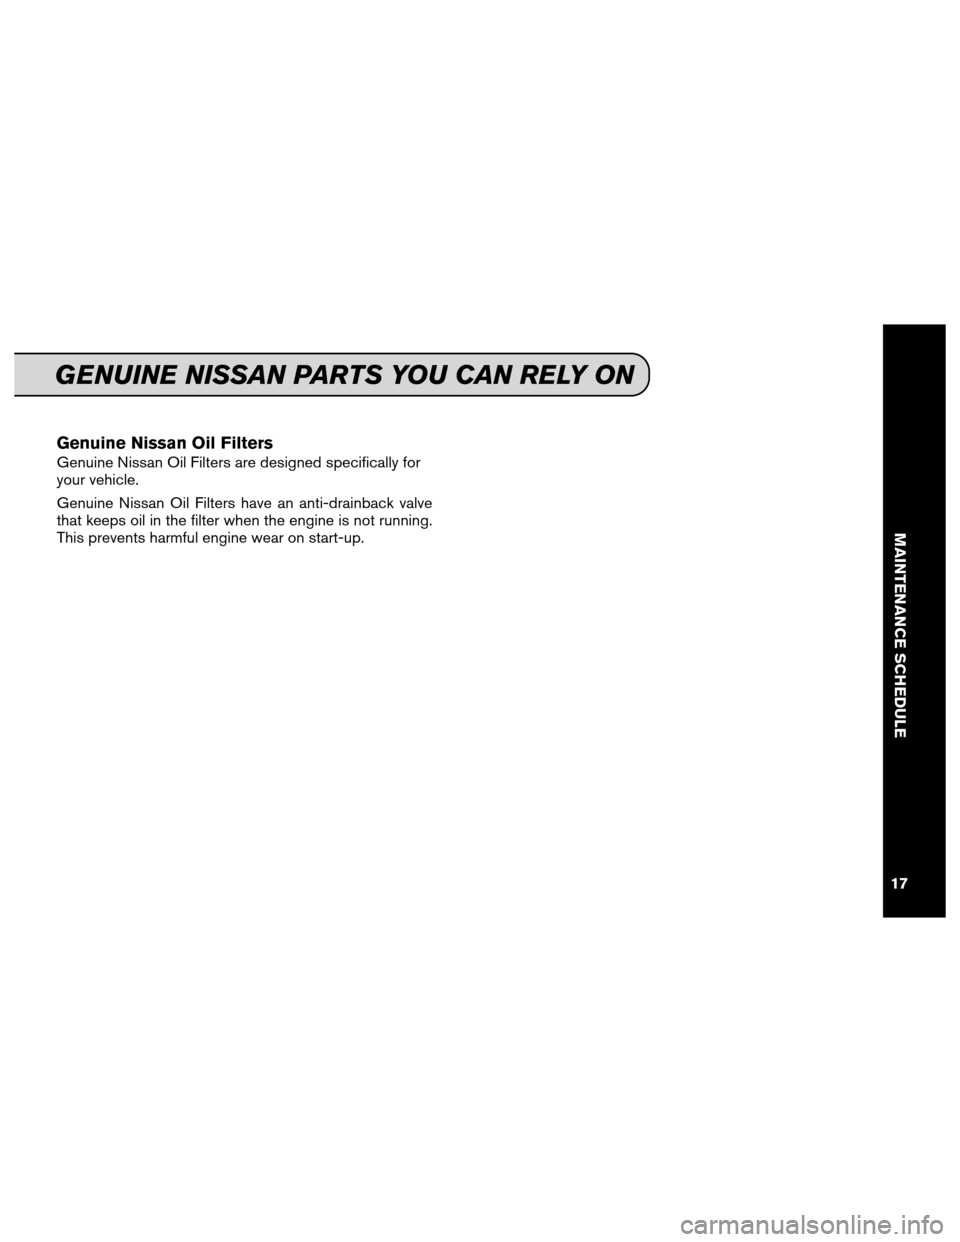 NISSAN QUEST 2013 RE52 / 4.G Service And Maintenance Guide Genuine Nissan Oil Filters
Genuine Nissan Oil Filters are designed specifically for
your vehicle.
Genuine Nissan Oil Filters have an anti-drainback valve
that keeps oil in the filter when the engine i